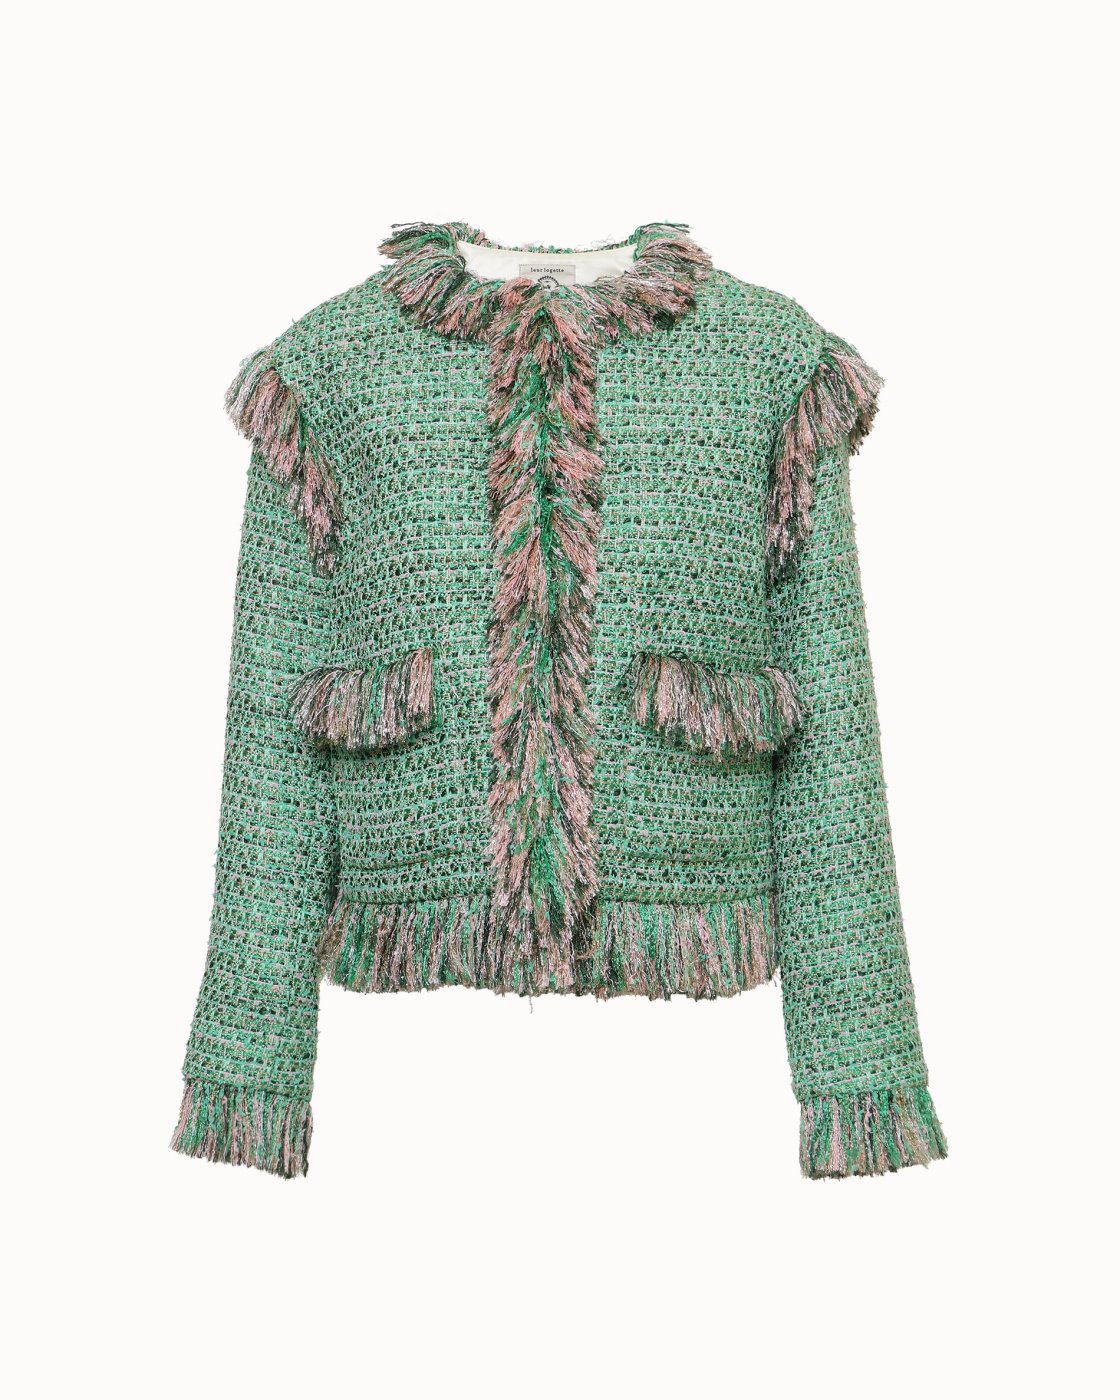 leur logette - <img class='new_mark_img1' src='https://img.shop-pro.jp/img/new/icons1.gif' style='border:none;display:inline;margin:0px;padding:0px;width:auto;' />Field Tweed Jacket - Green